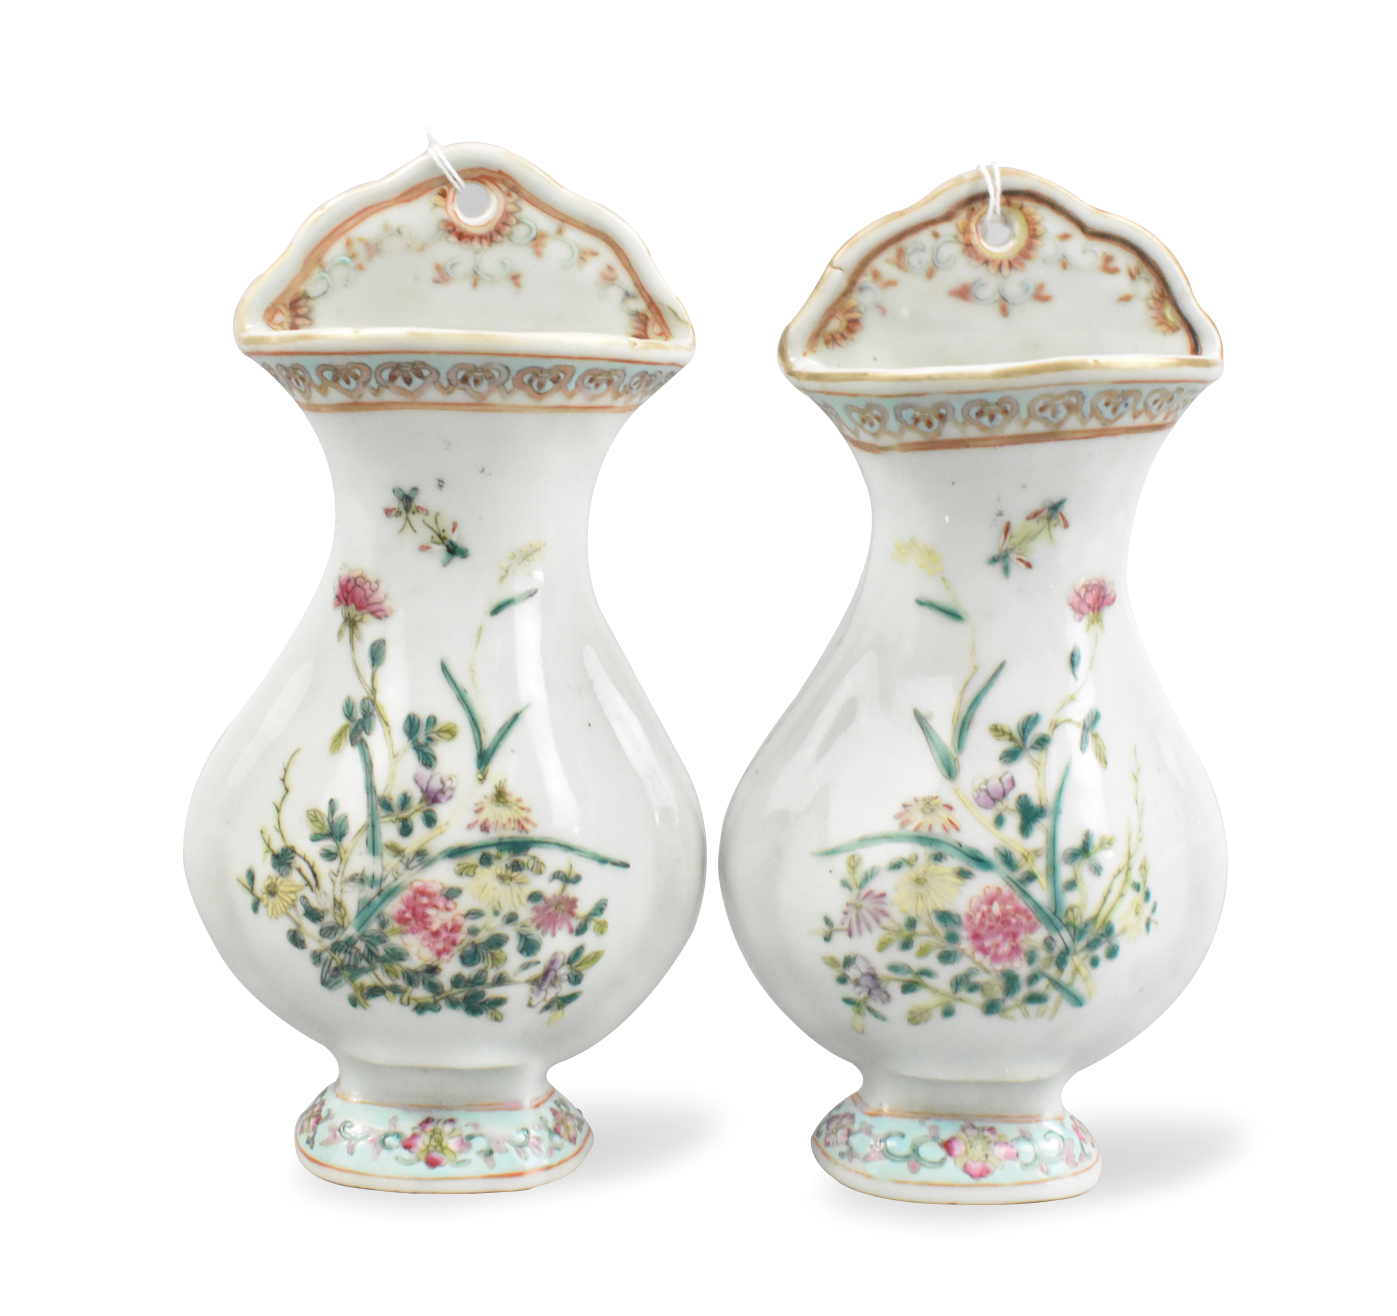 PAIR OF CHINESE FAMILLE ROSE WALL 33a572